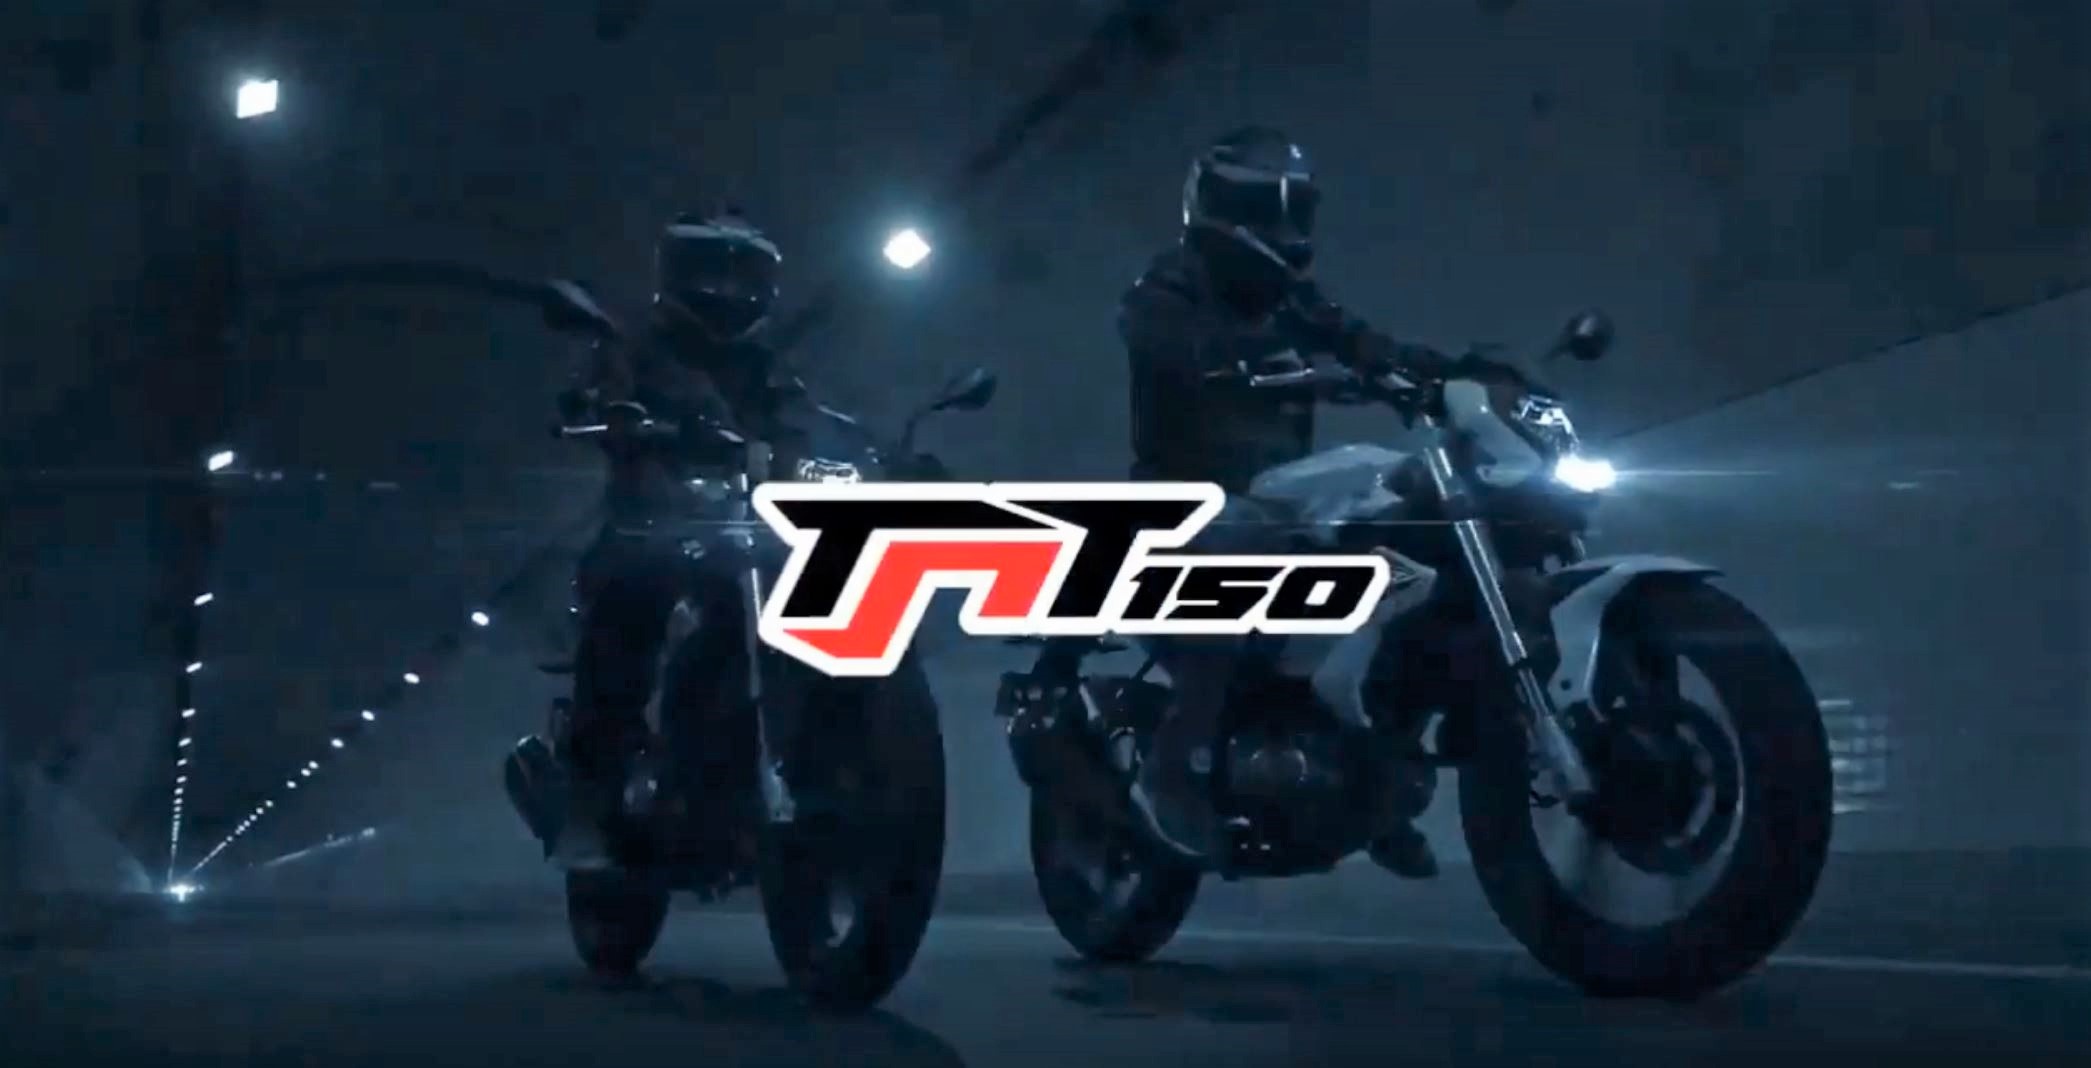 2017-02-02-17_06_09-new-benelli-tnt-150-_-official-teaser-youtube